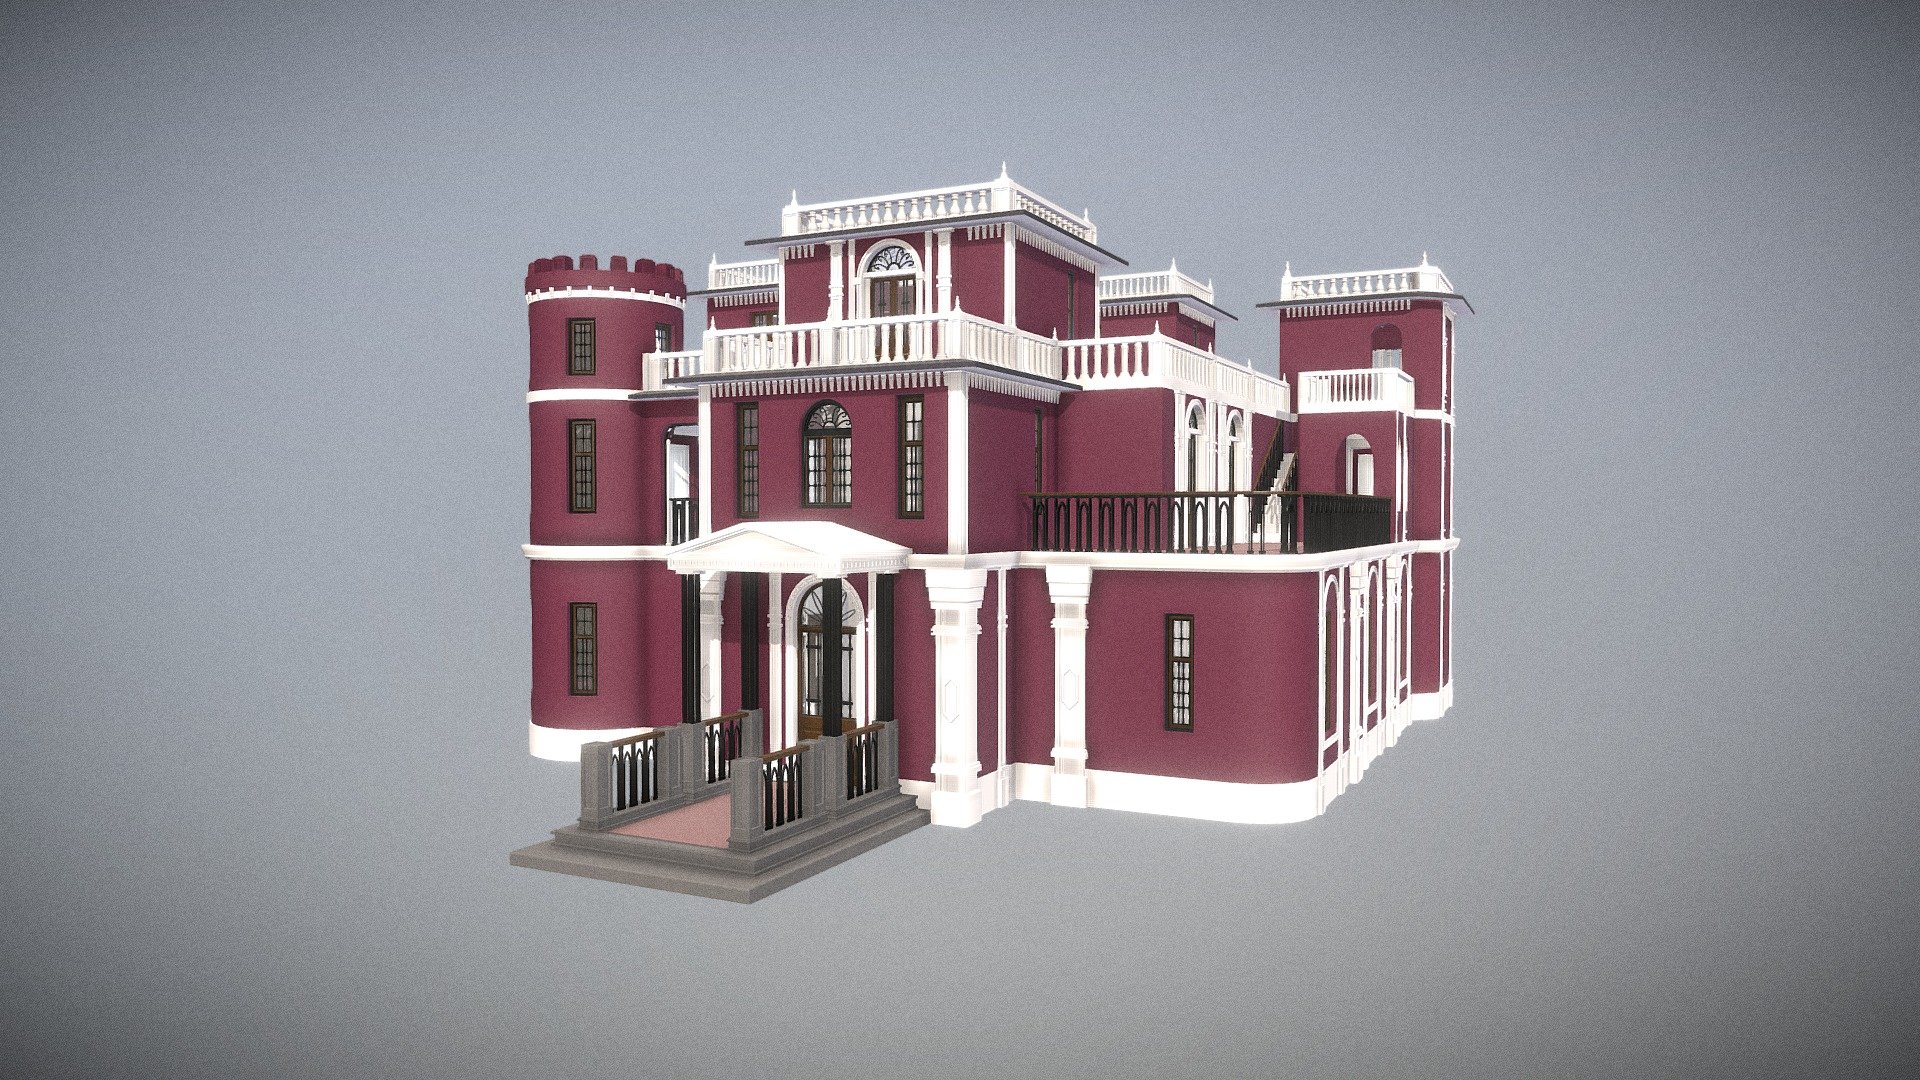 This model, made in Blender, Contains several textures applied to it, but it doesn't have a UV unwrapping appropriately, also about its materials are a little disorganized and it doesn't have any image or baking textures applied to it.

This model is a house or mansion kind of castle, also have a simple interior desing 3d model